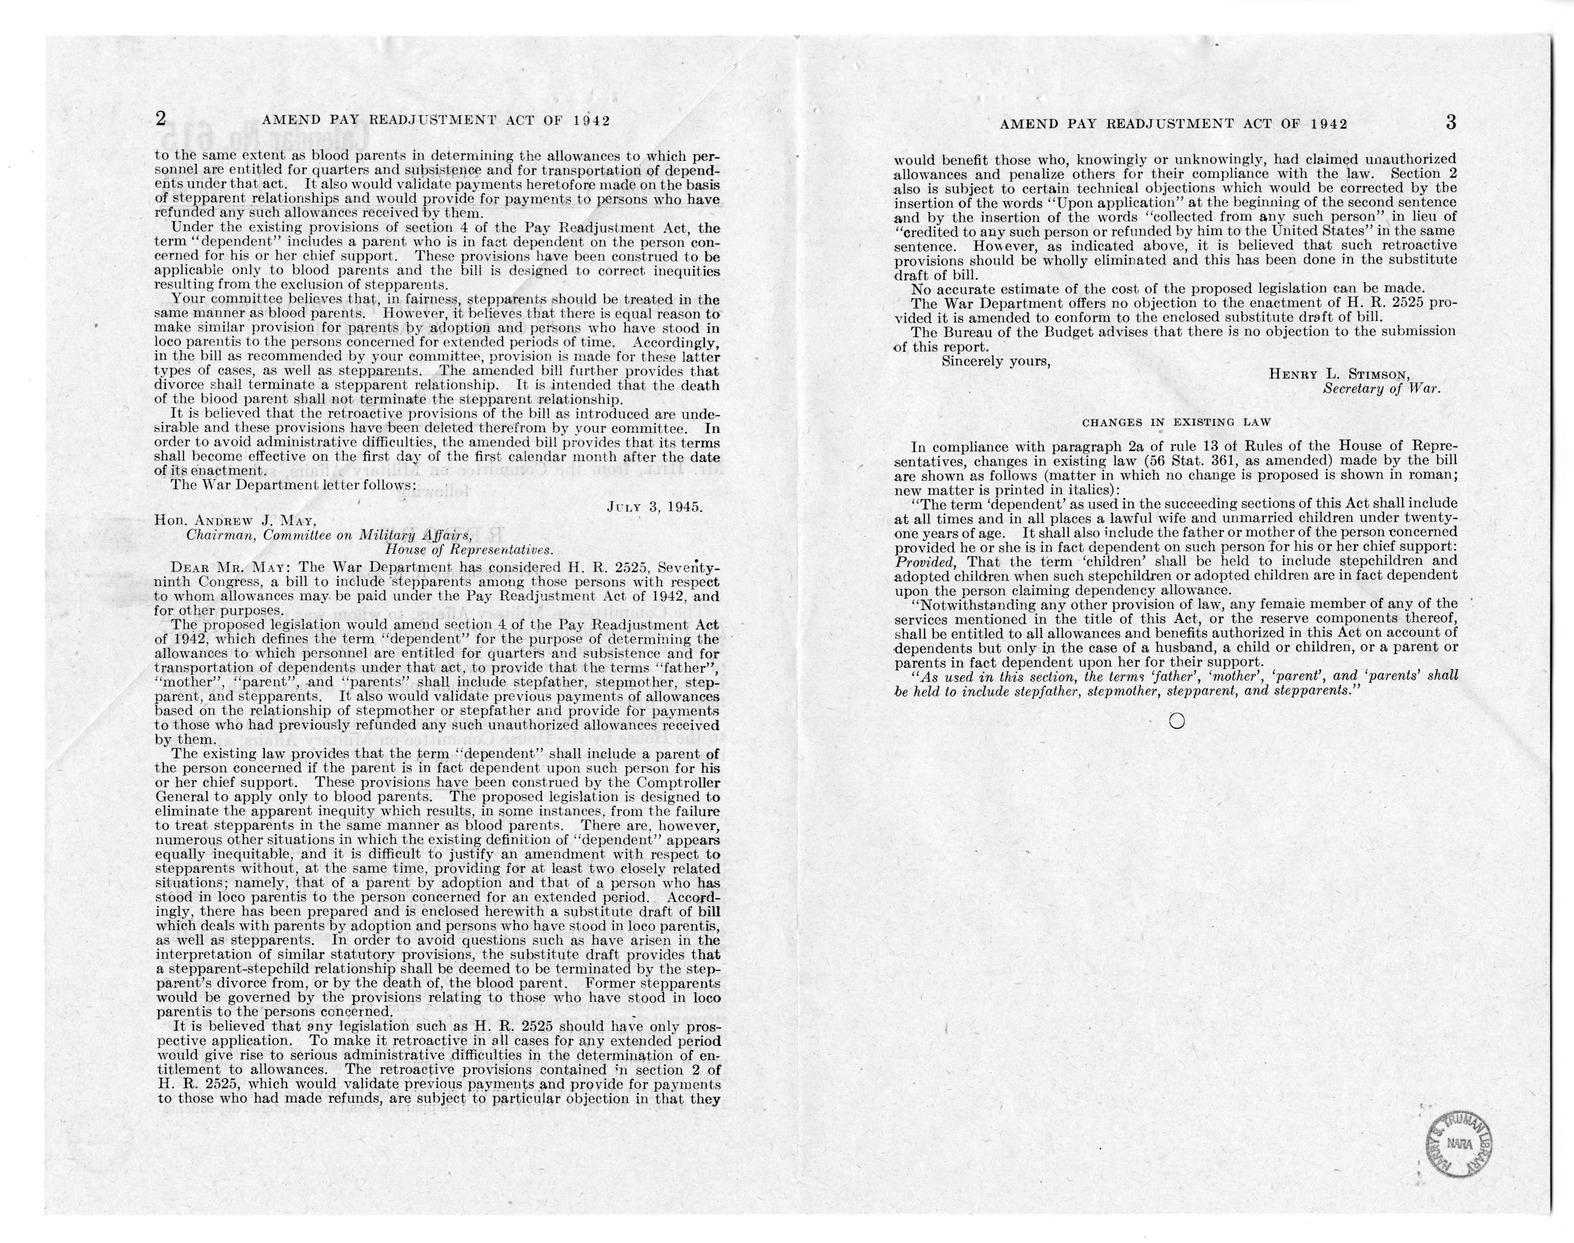 Memorandum from Frederick J. Bailey to M. C. Latta, H.R. 2525, To Include Stepparents, Parents by Adoption, and Any Parent Who has Stood in Loco Parentis Among those Persons With Respect to Whom Allowances May be Paid Under the Pay Readjustment Act of 194s, with Attachments